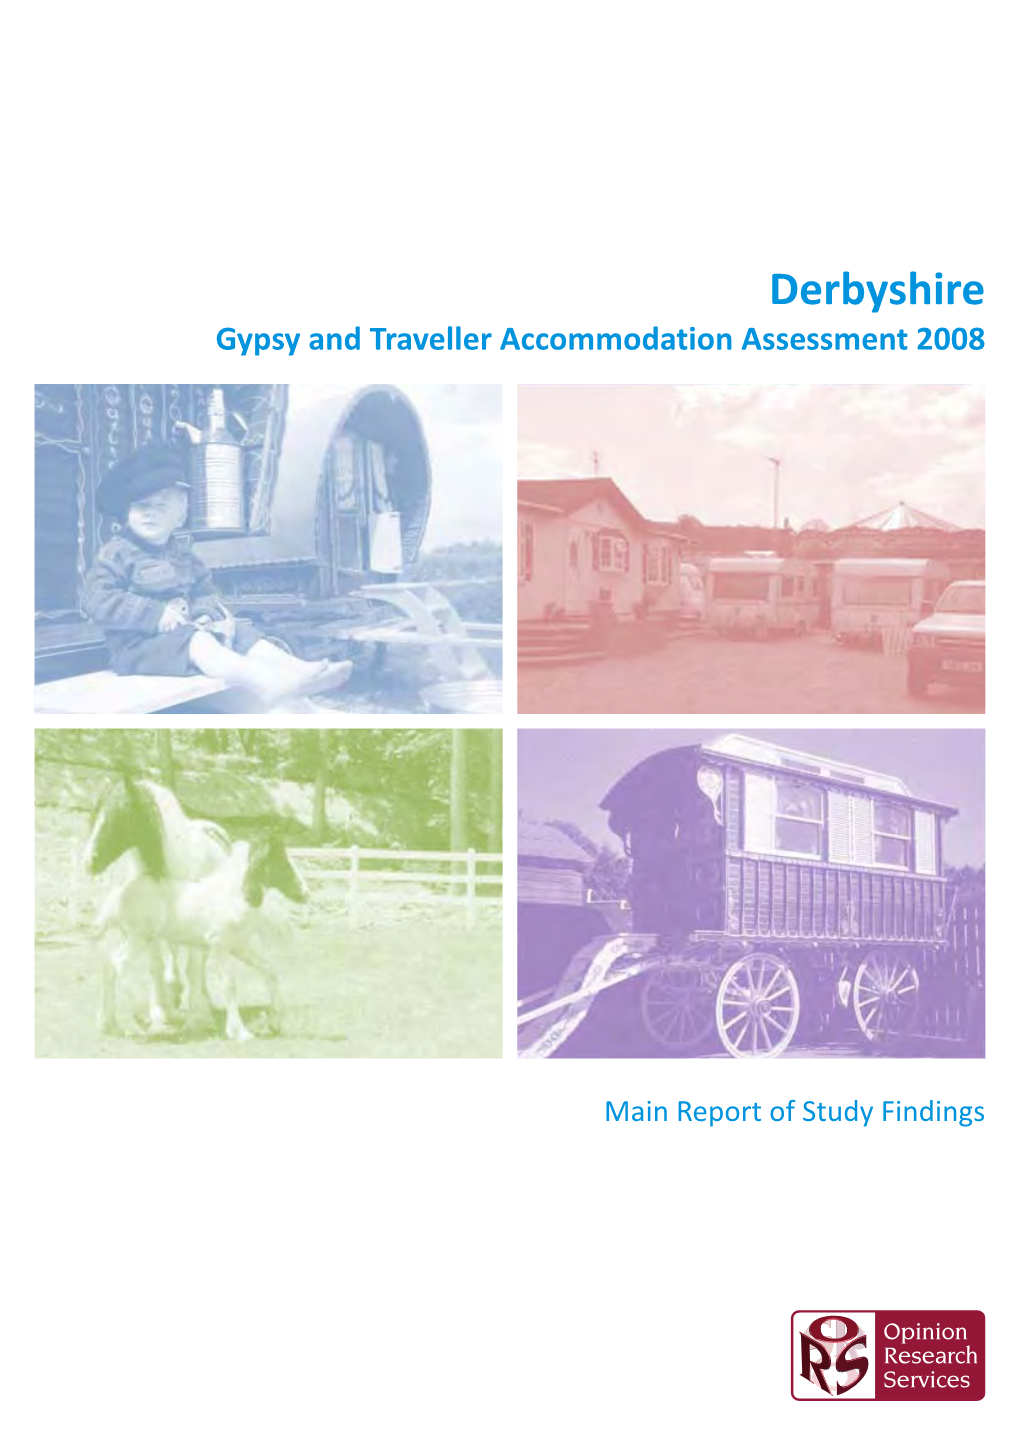 Derbyshire Gypsy and Traveller Accommodation Assessment 2008